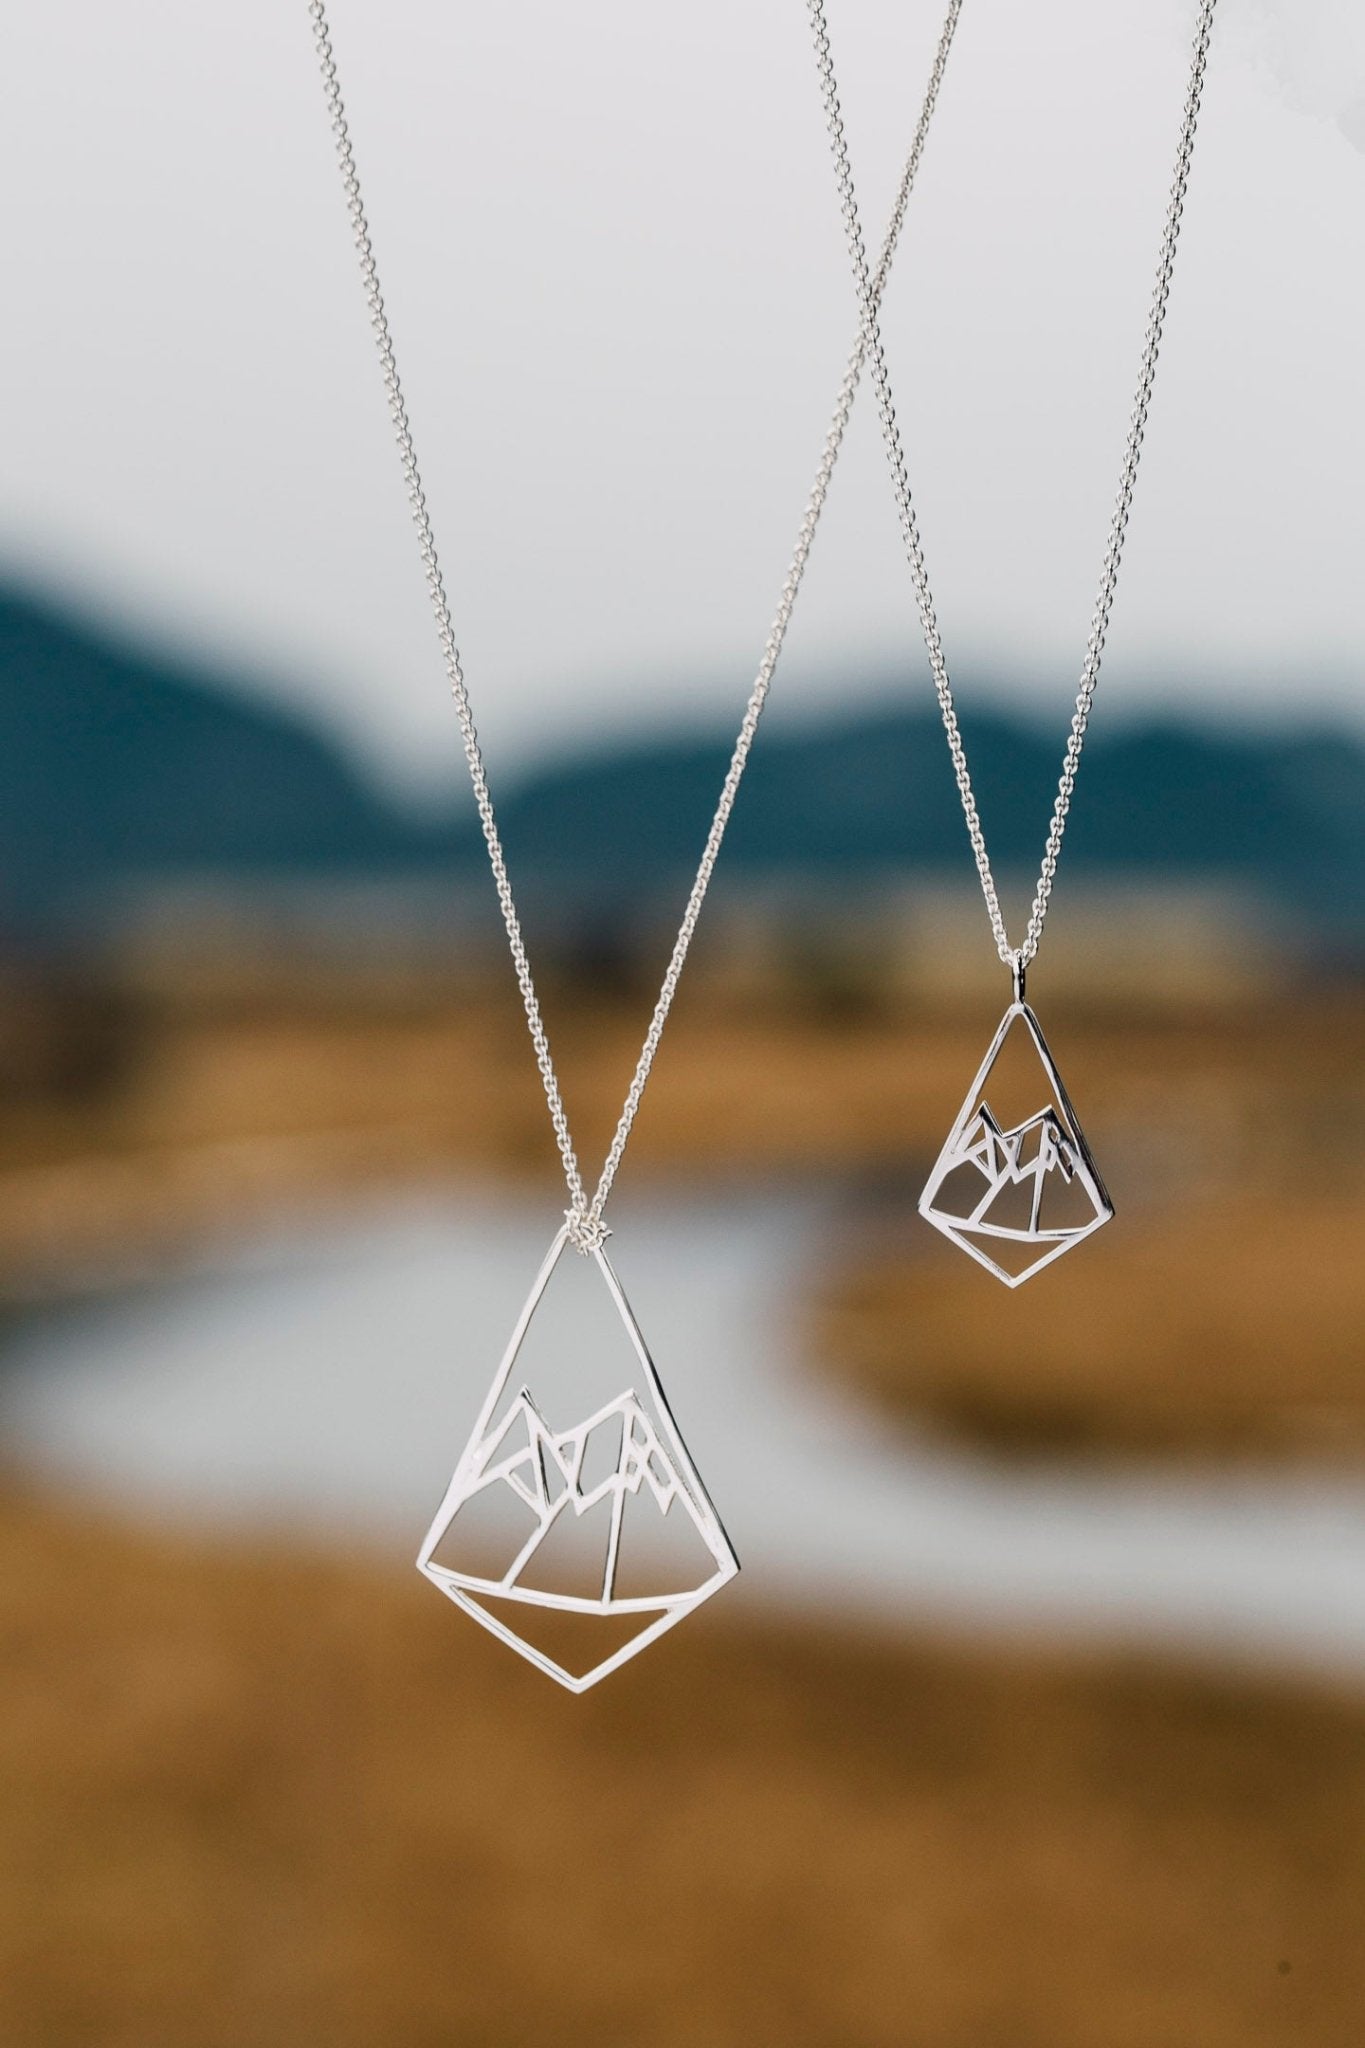 925 sterling silver Geo mountain and Petite Geo Mountain pendant necklaces hanging on a nature blur background